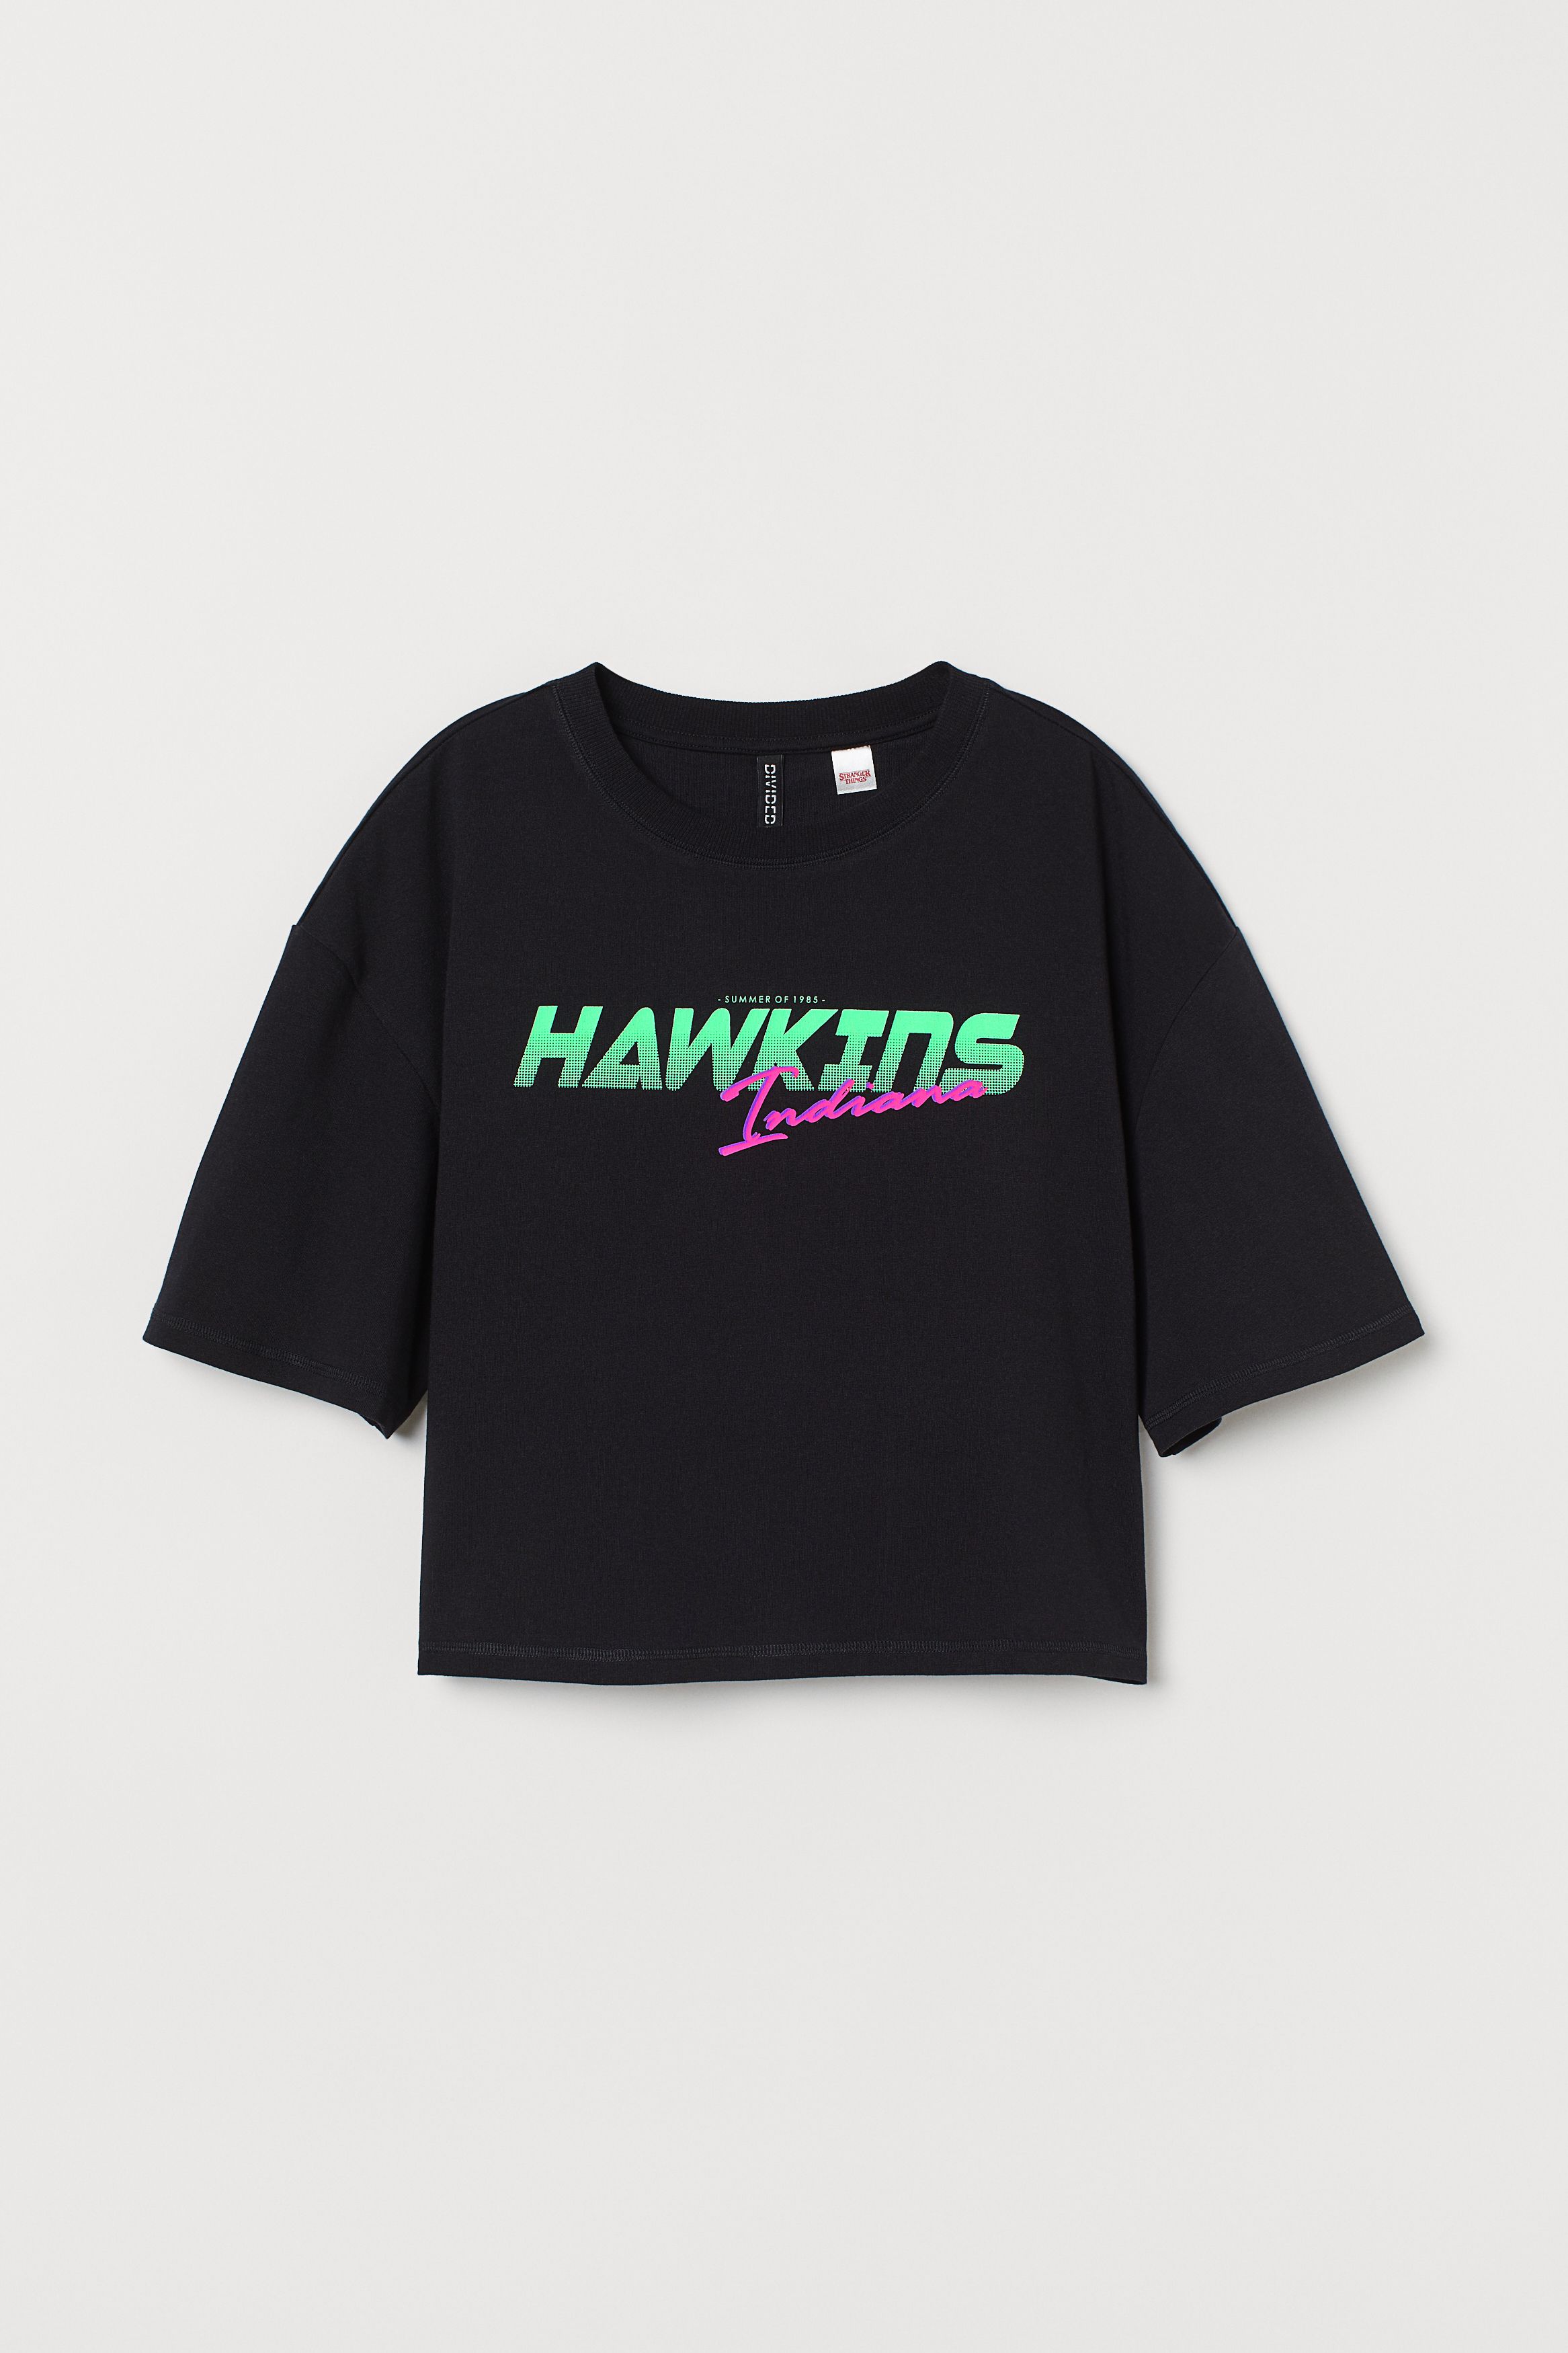 palm commando rukken Every piece from the H&M x Stranger Things collection